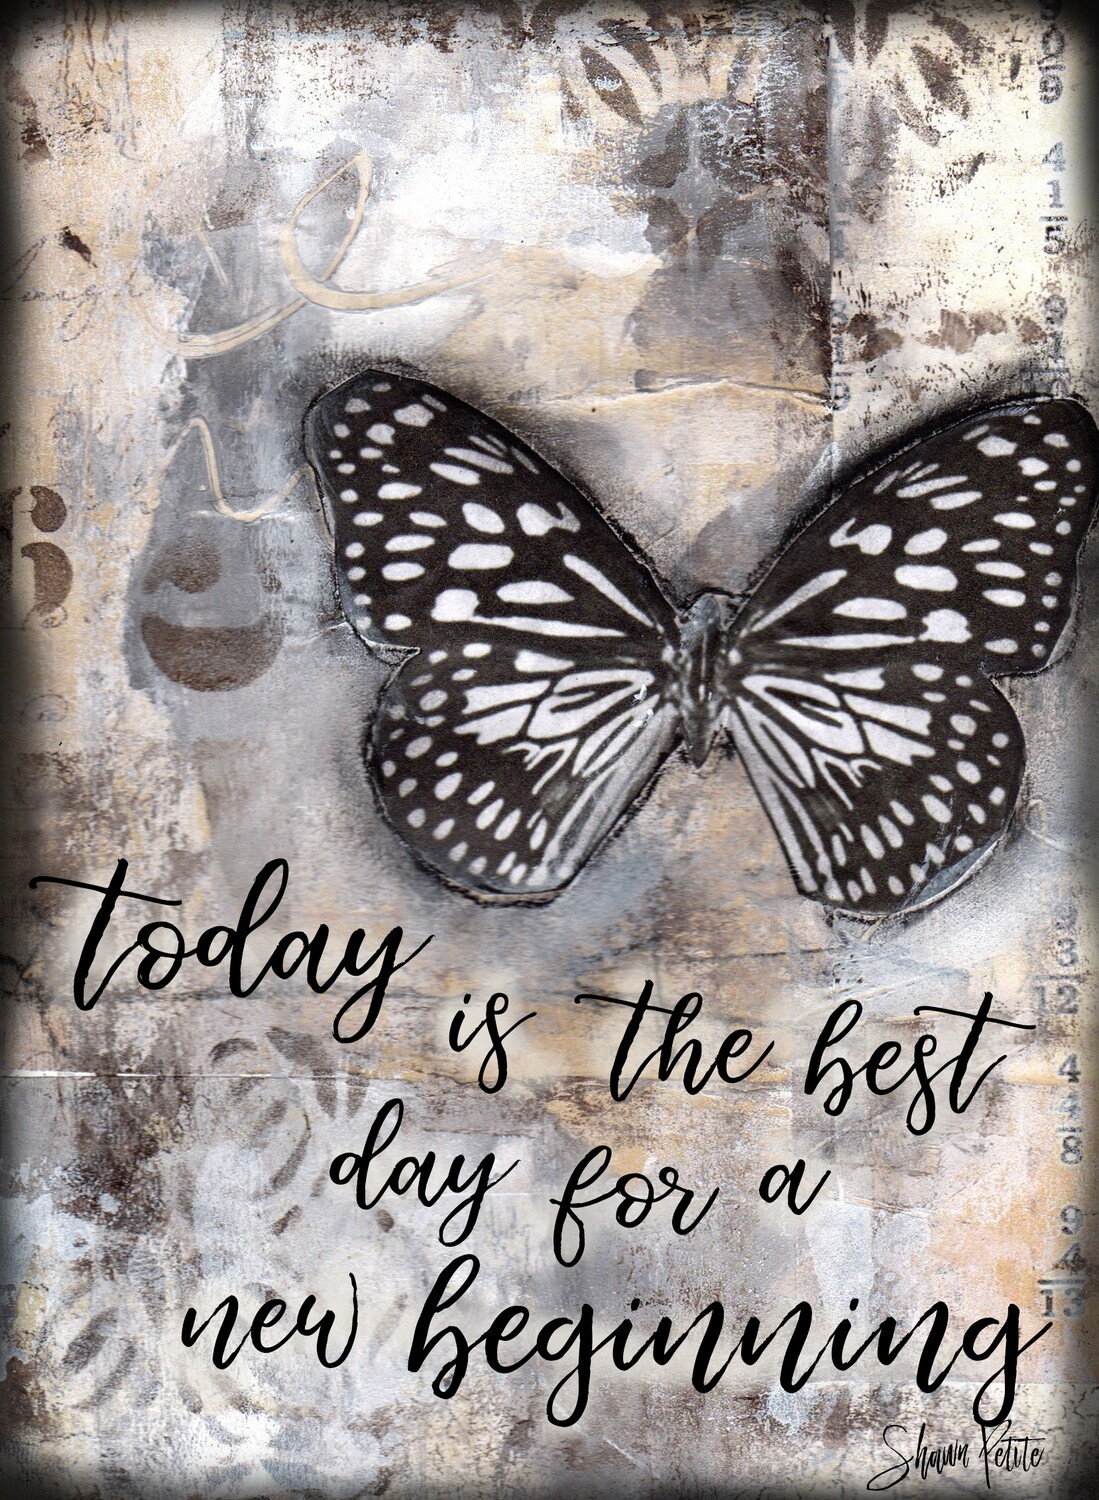 "Today is the best day for a new beginning" Print on Wood 5x7 Overstock